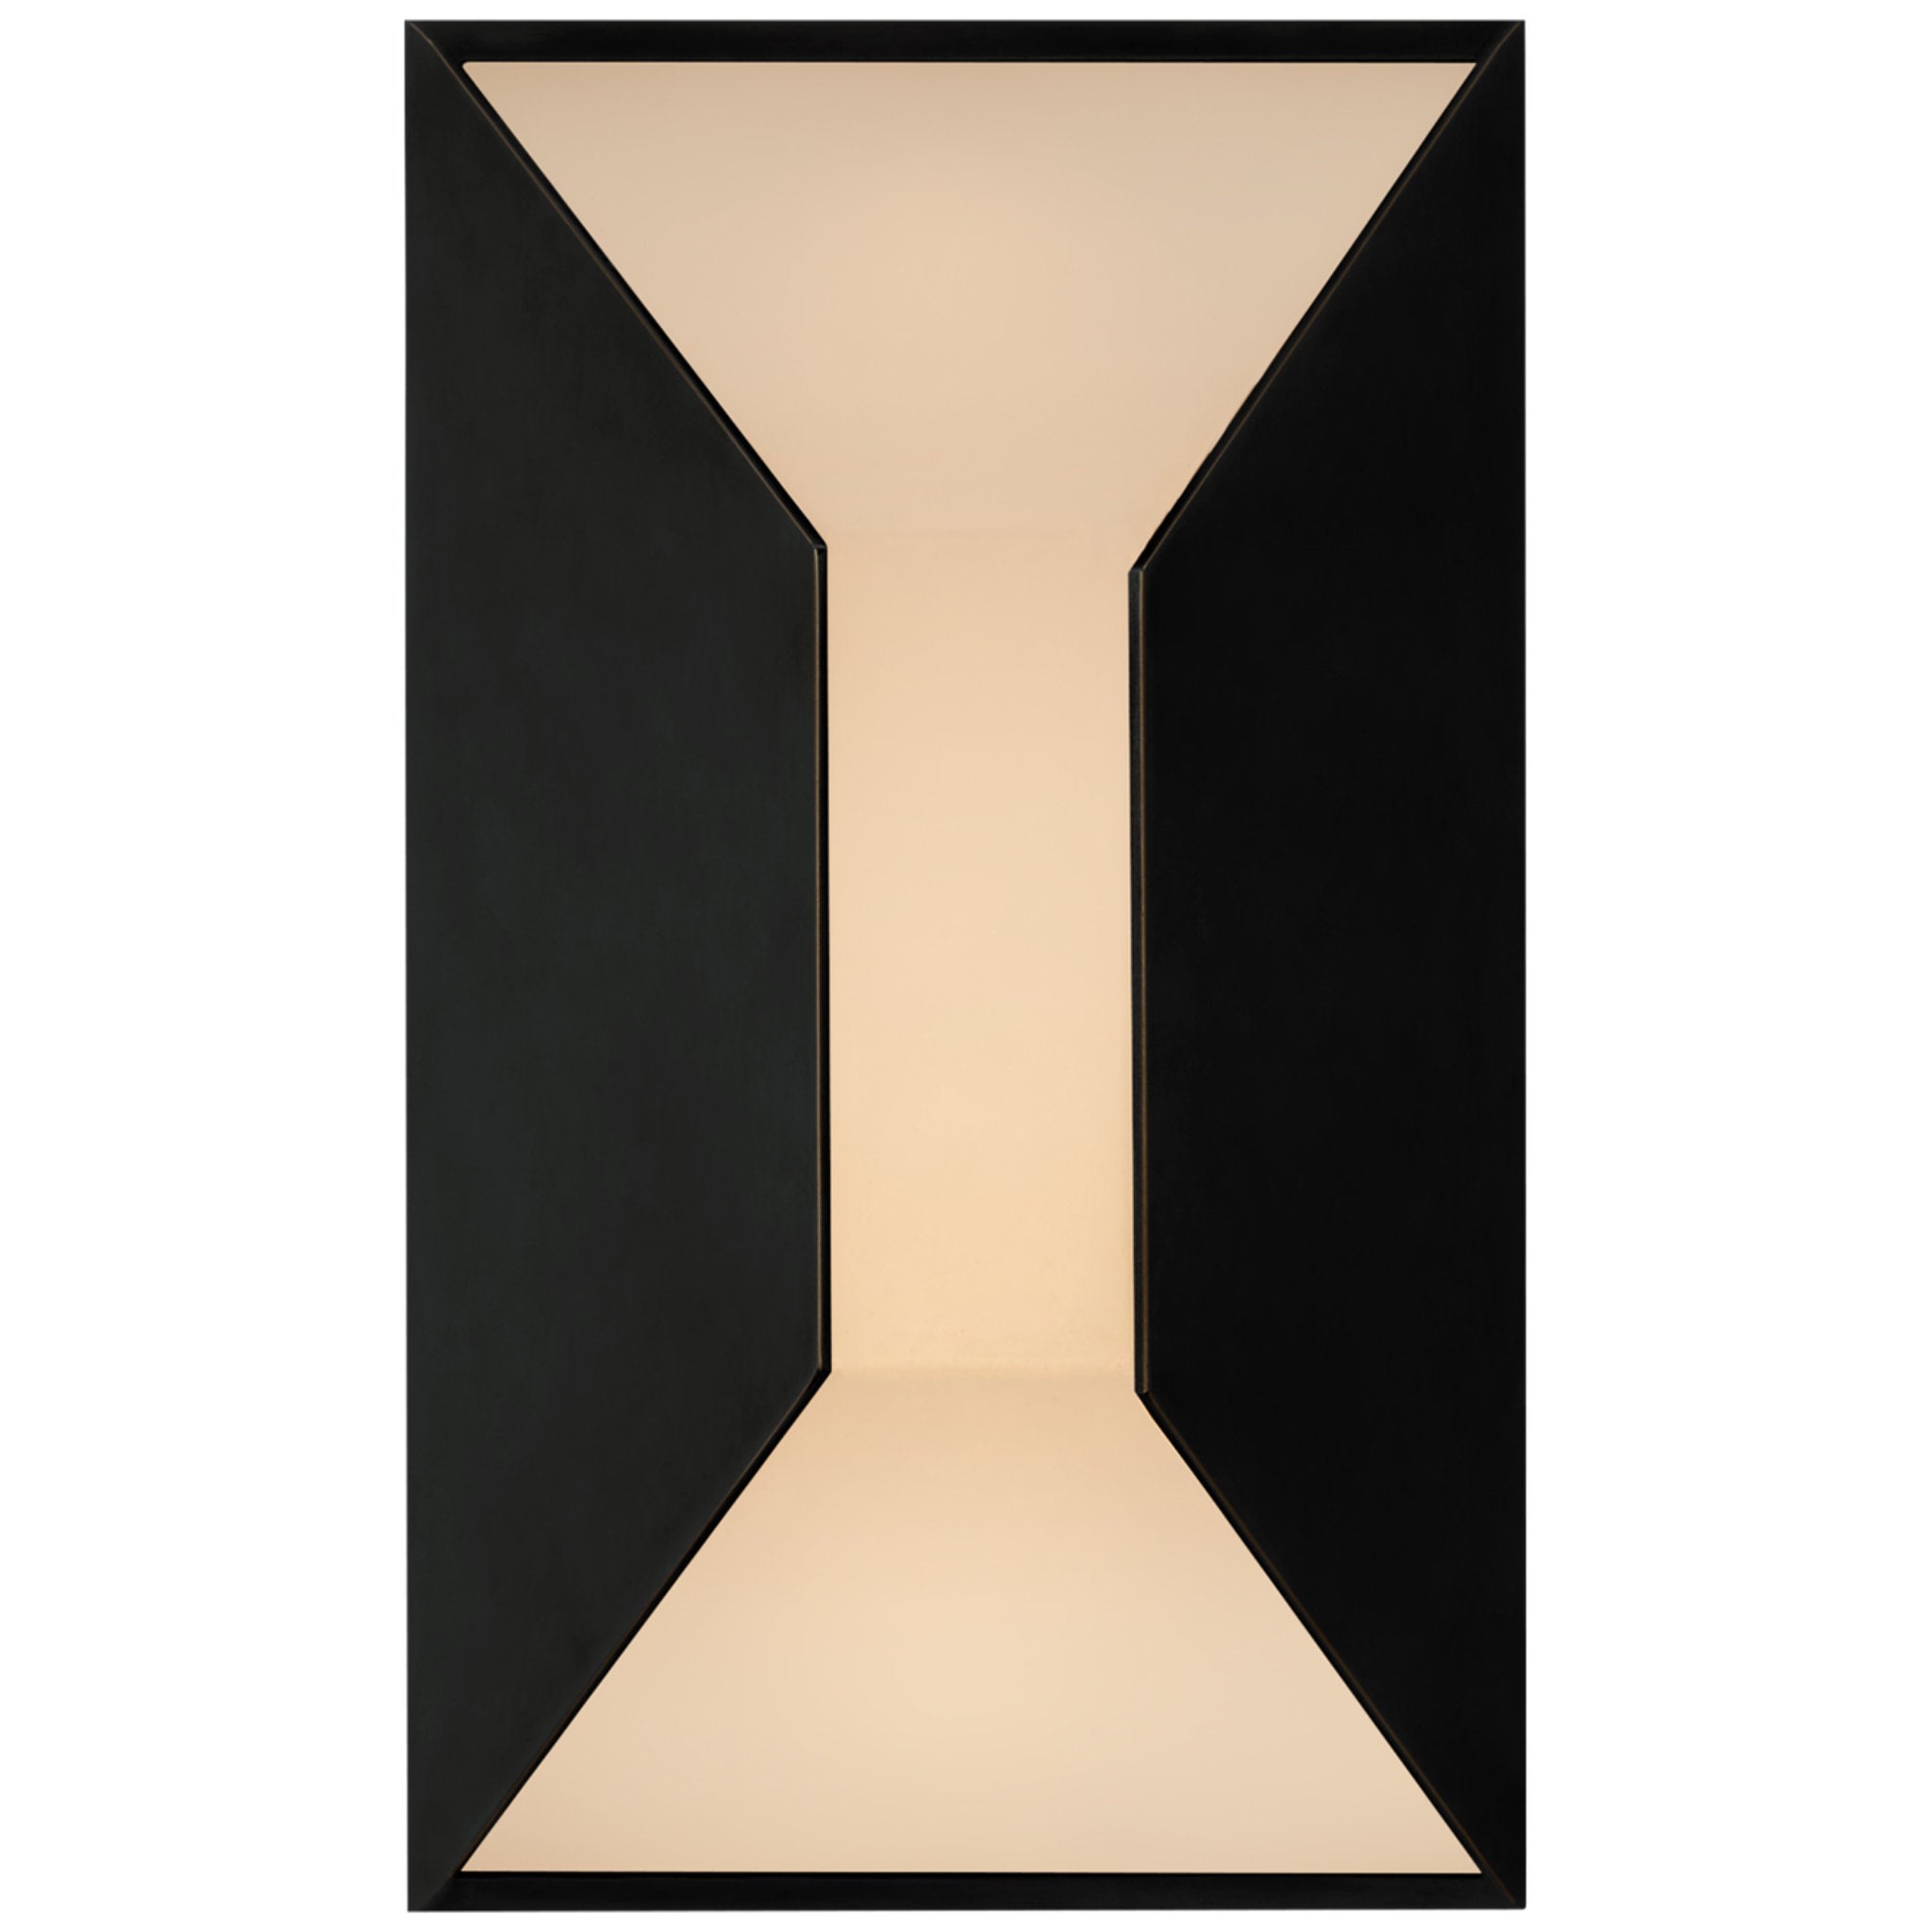 Kelly Wearstler Stretto 8" Sconce in Bronze with Frosted Glass